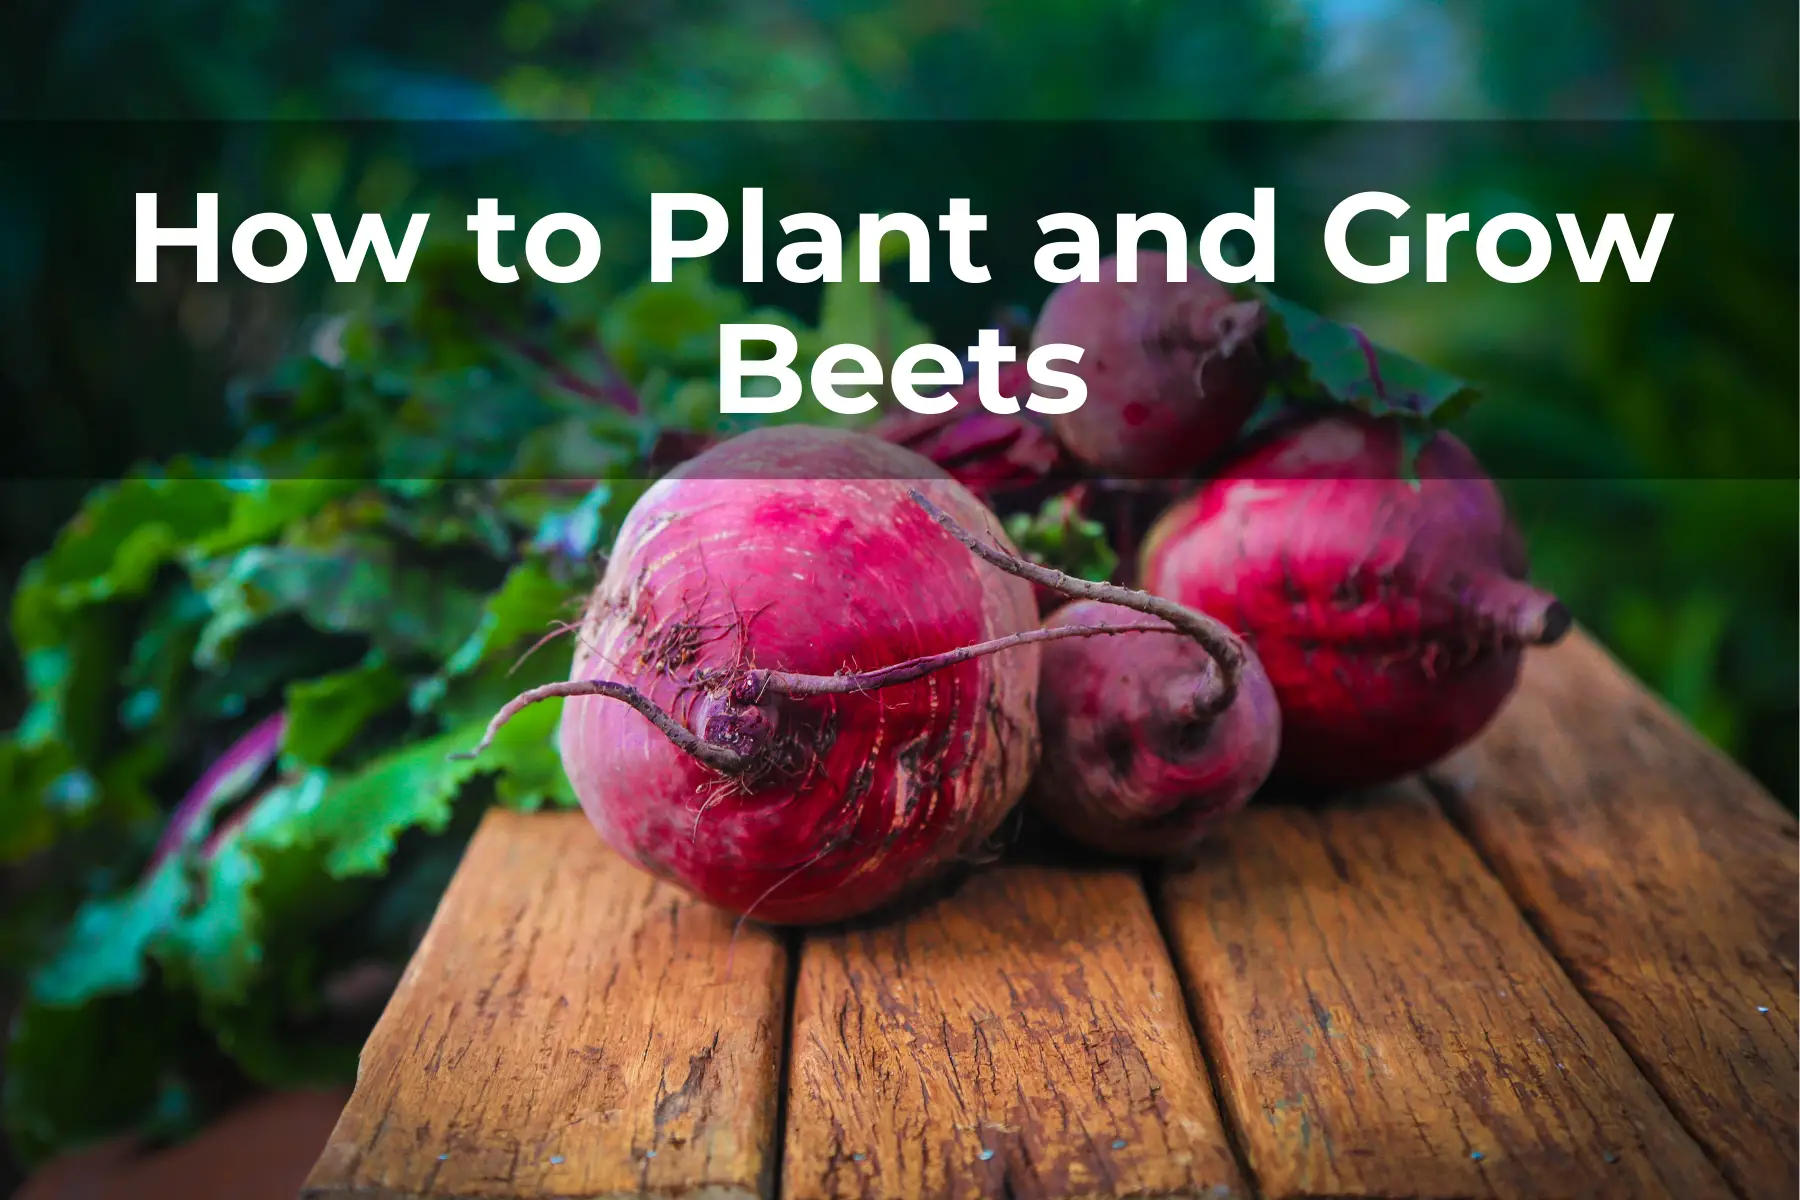 How to Plant and Grow, Beets